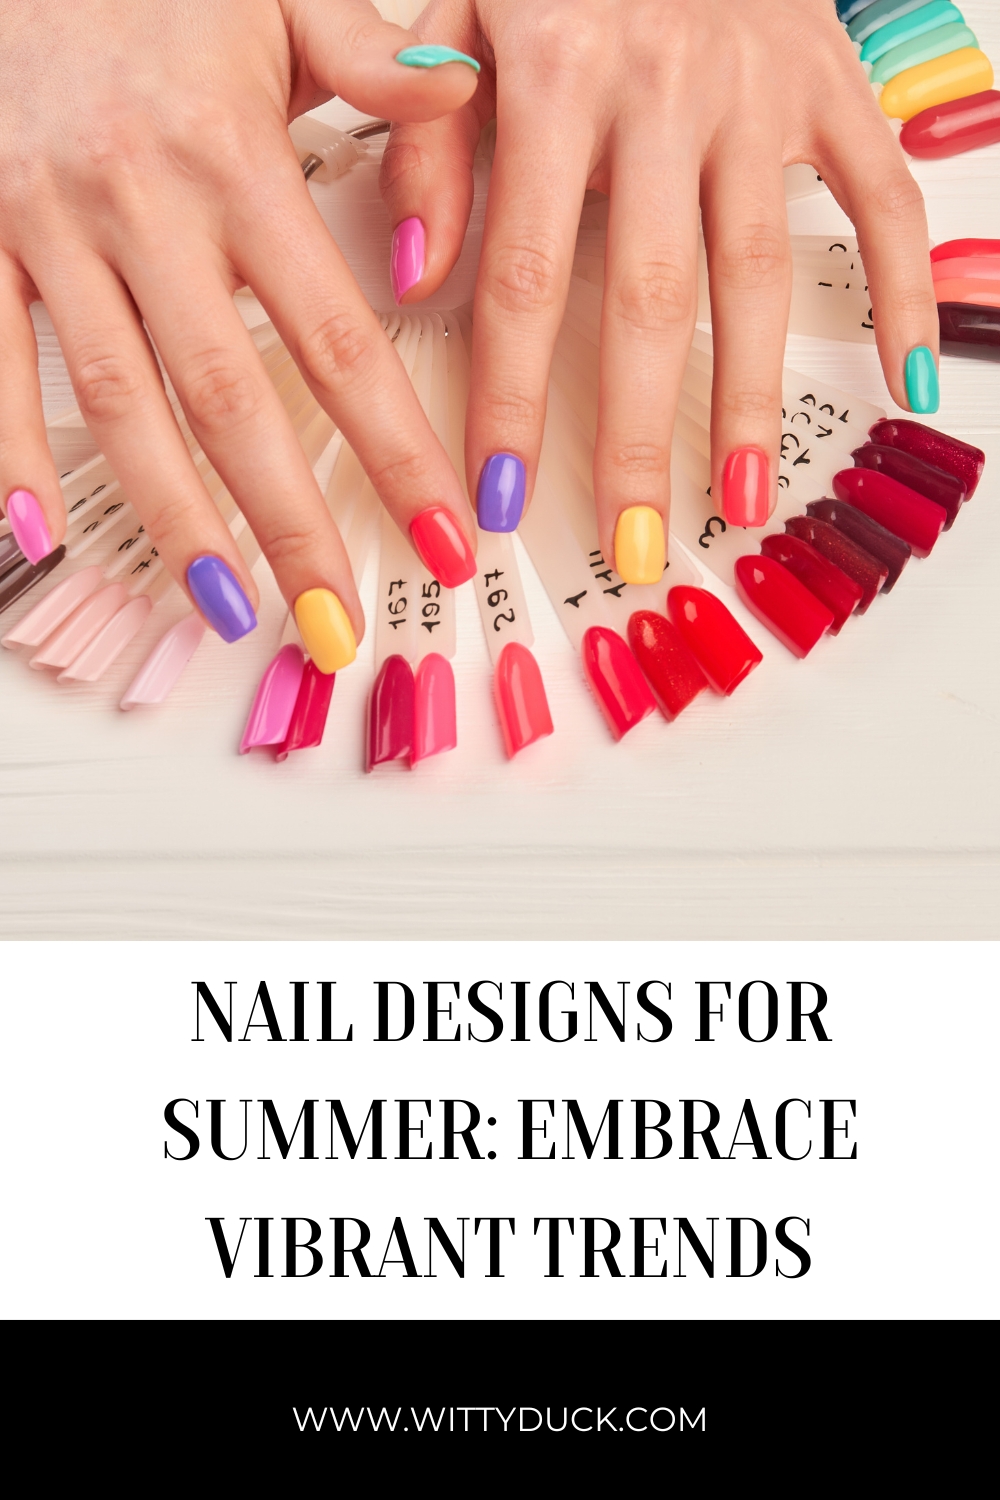 Nail Designs for Summer Embrace Vibrant Trends